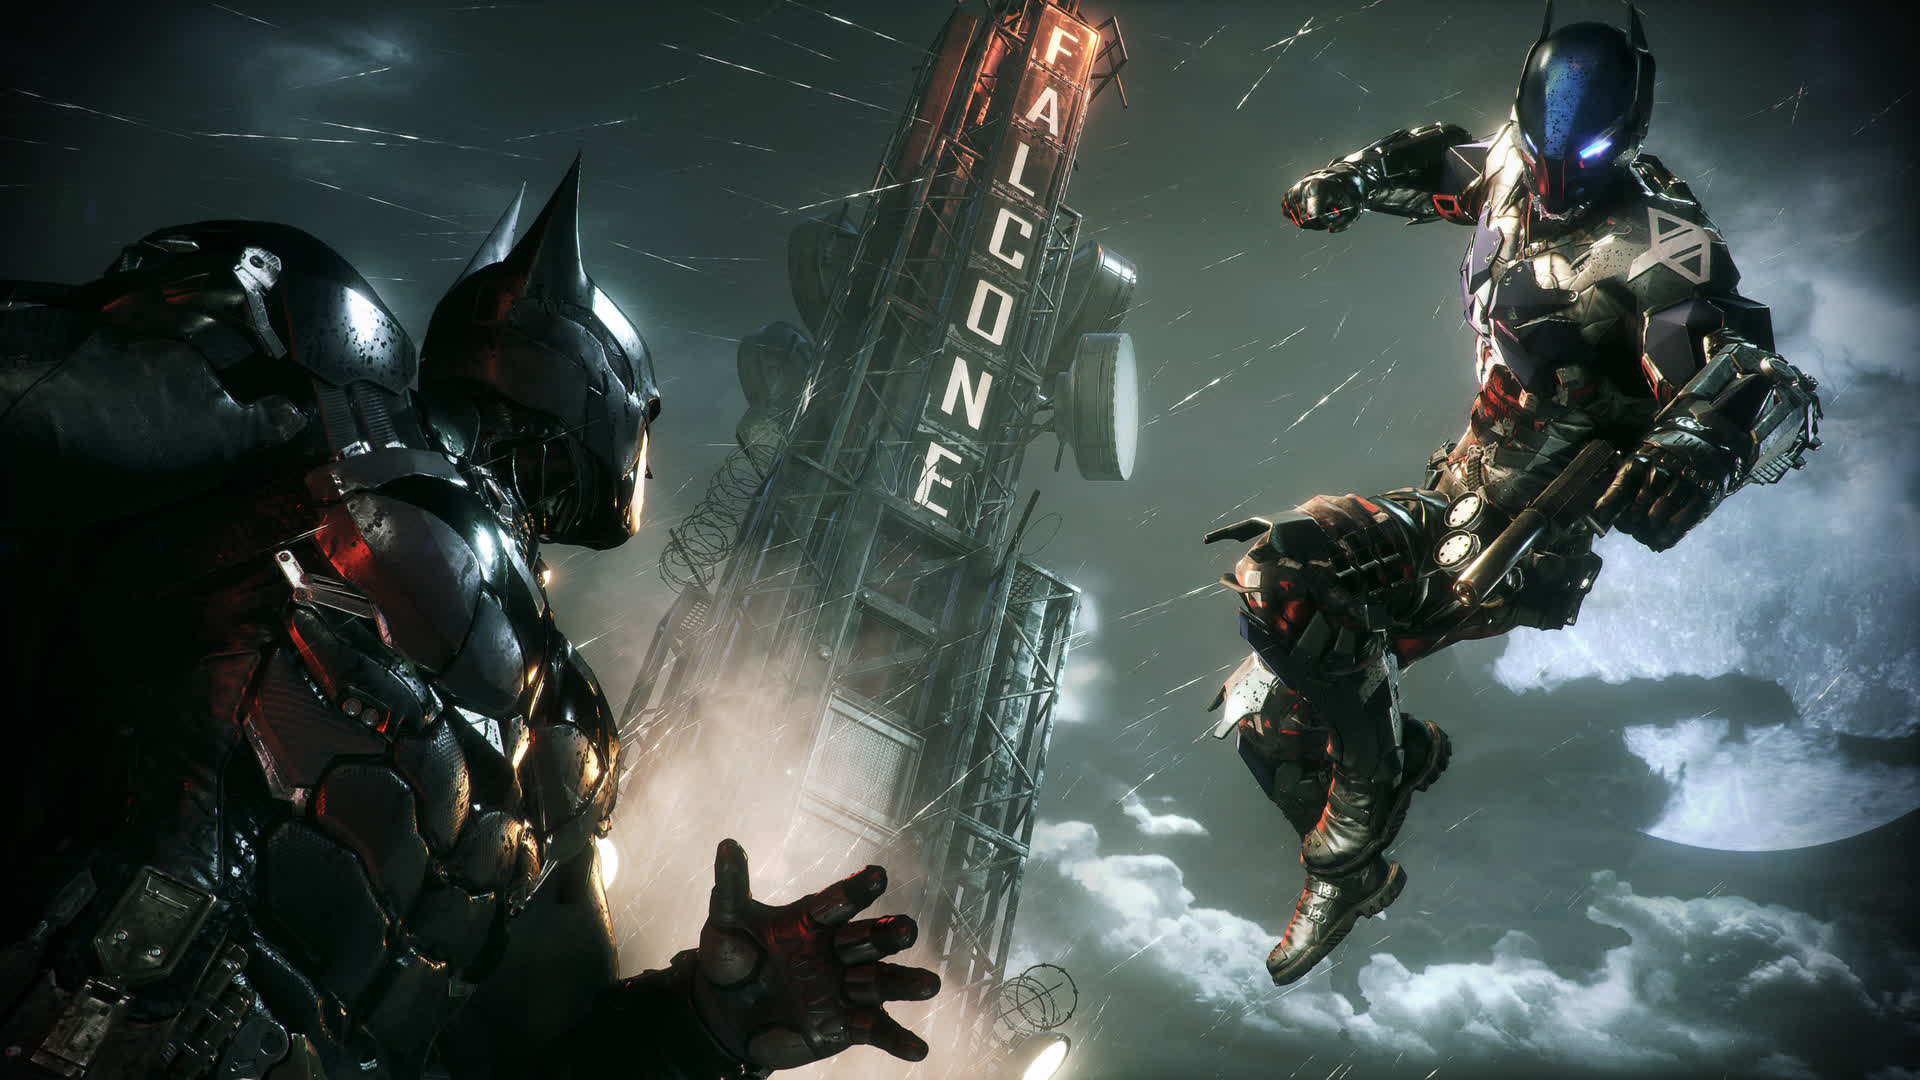 Google offering Stadia Tech with Batman: Arkham Knight Demo by AT&T